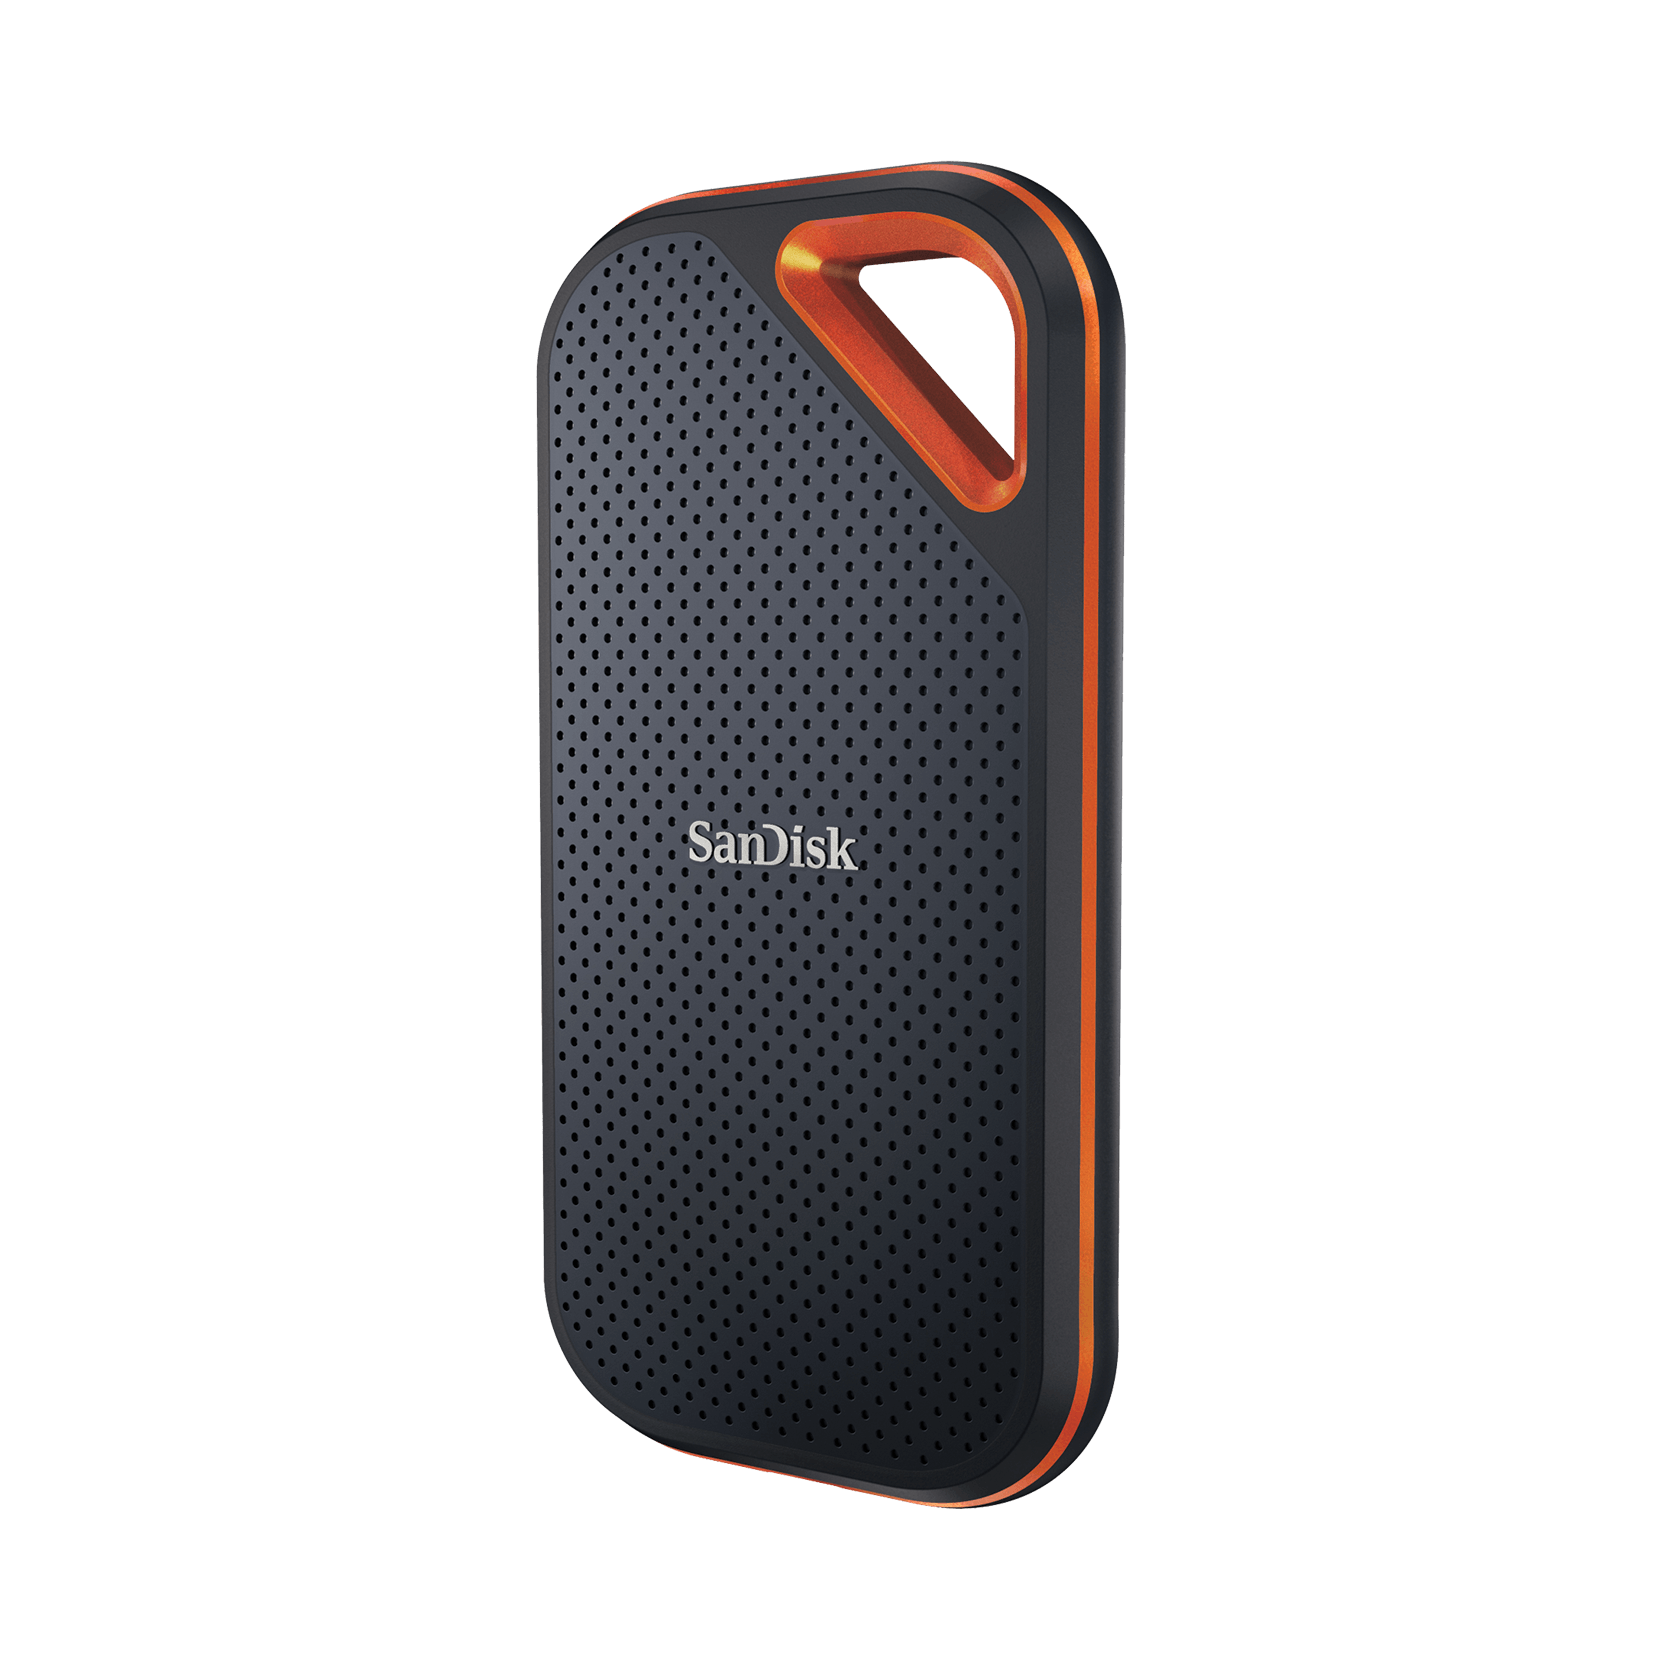 SanDisk Extreme PRO Portable SSD V2, 1TB 2TB 2000MB/s E81 USB 3.1 for Windows & Mac Type-C Type-A IP55 Dust and Water-Resistant